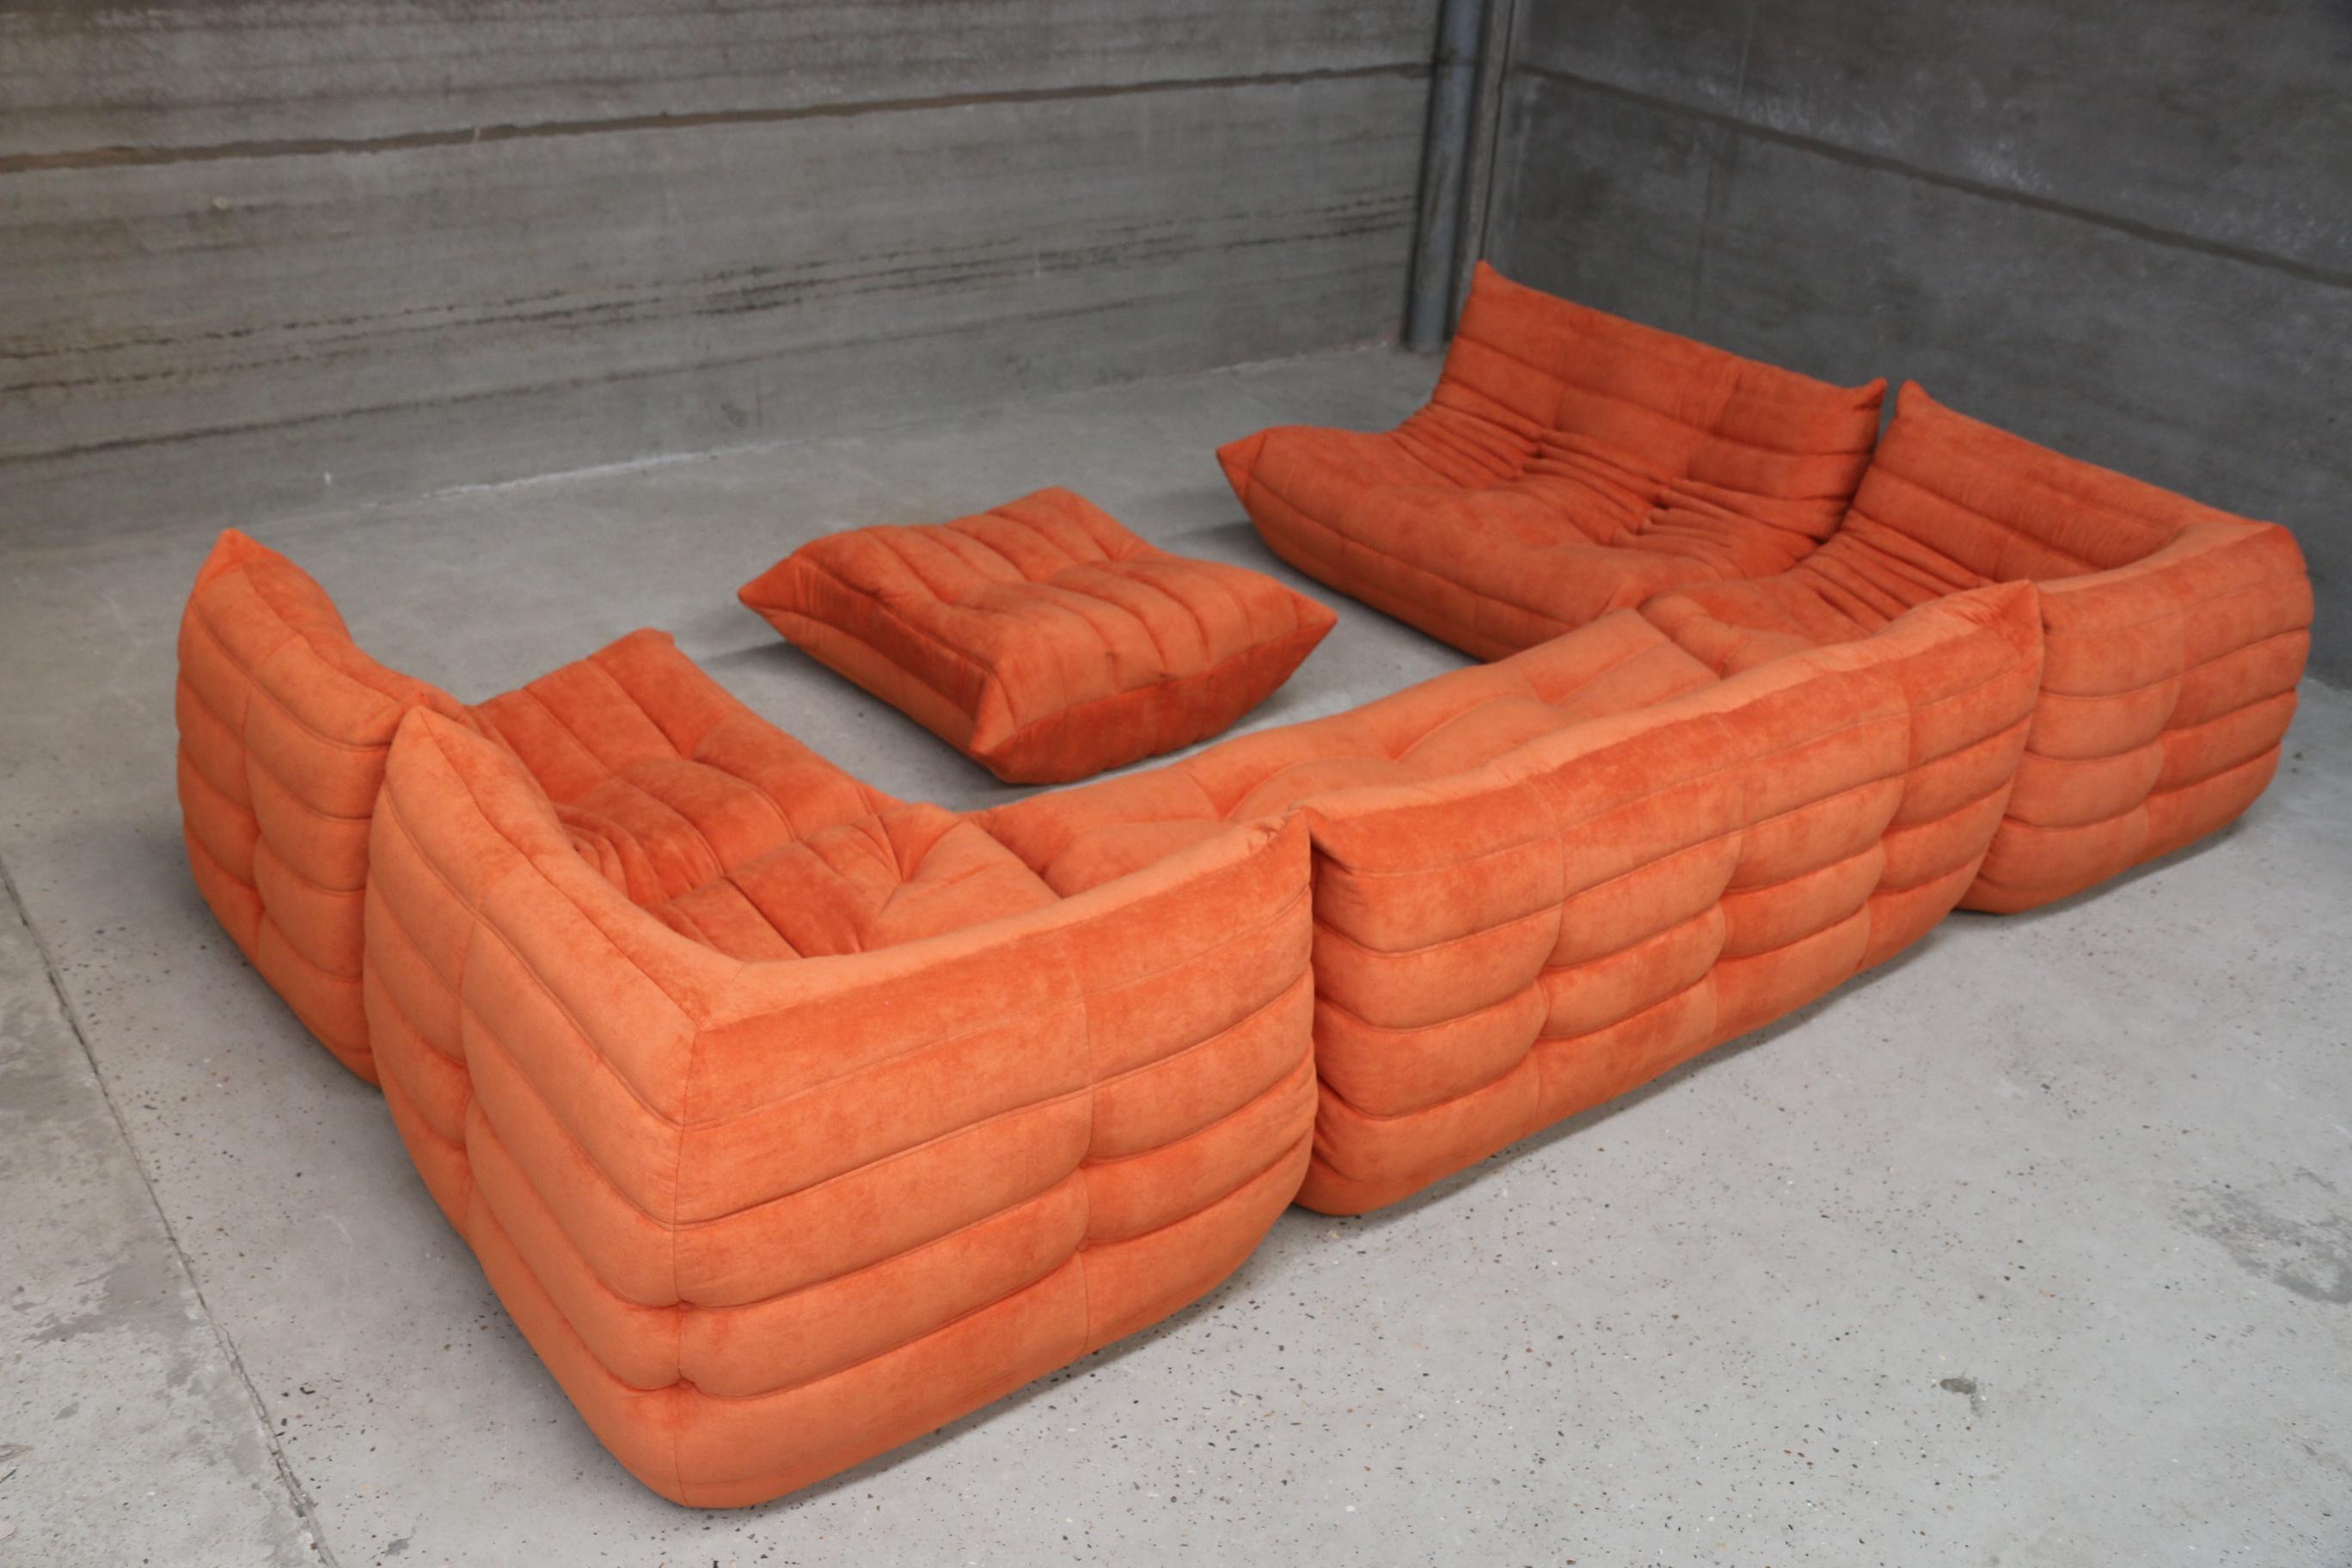 Very large modular French design midcentury sofa set by Michel Ducaroy 1973 design for Ligne Roset, France. Professionally rejuvenated by Bellalu original label pin and bases. The original fabric has been replaced. Upholstered in new stain free and